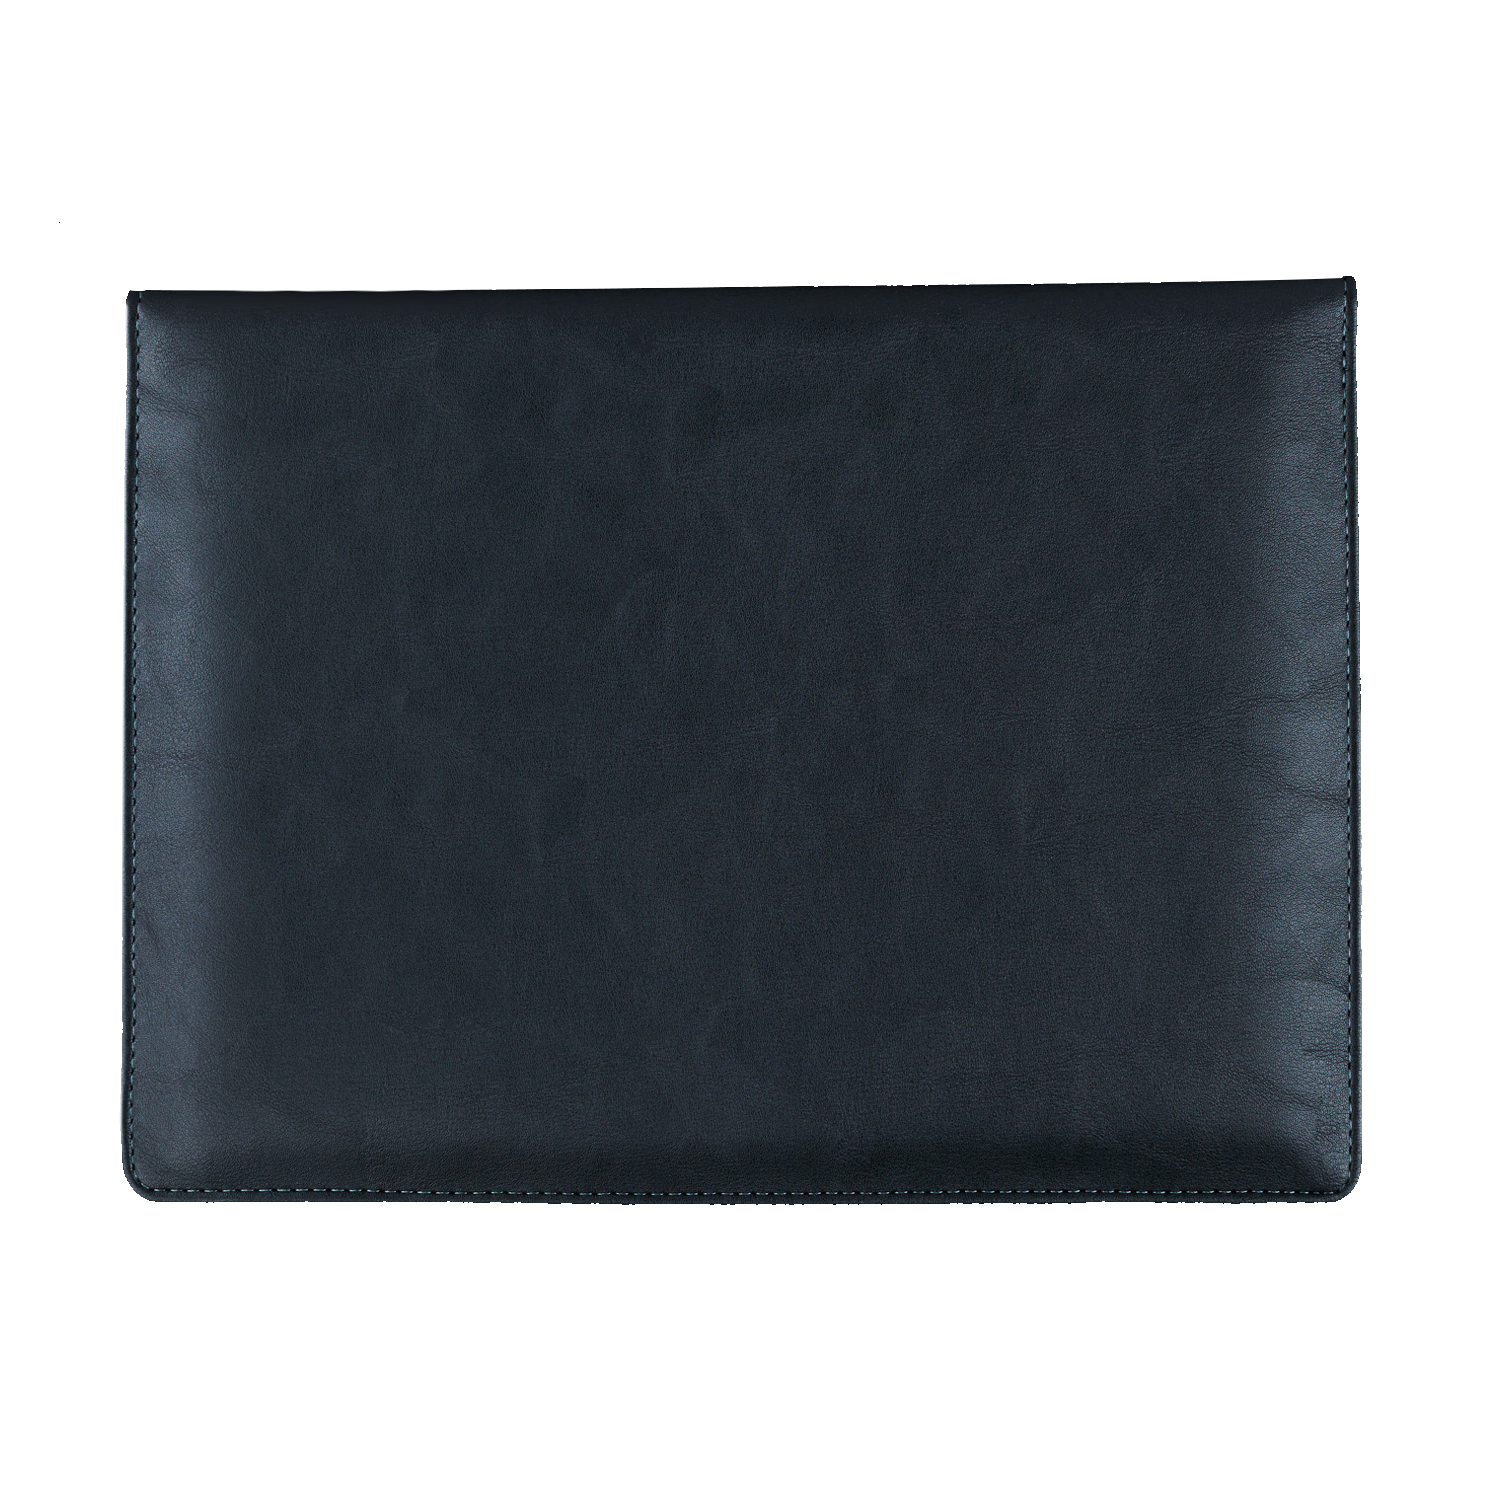 Soft PU Leather Sleeve Case Bag For 13 - 13.3 Inch Laptop/ Notebook/ MacBook/ Ultrabook/ Chromebook Computers (Apple/ Acer/ Asus/ Dell/ Fujitsu/ Lenovo/ HP/ Samsung/ Sony/ Toshiba etc), Black - image 3 of 6